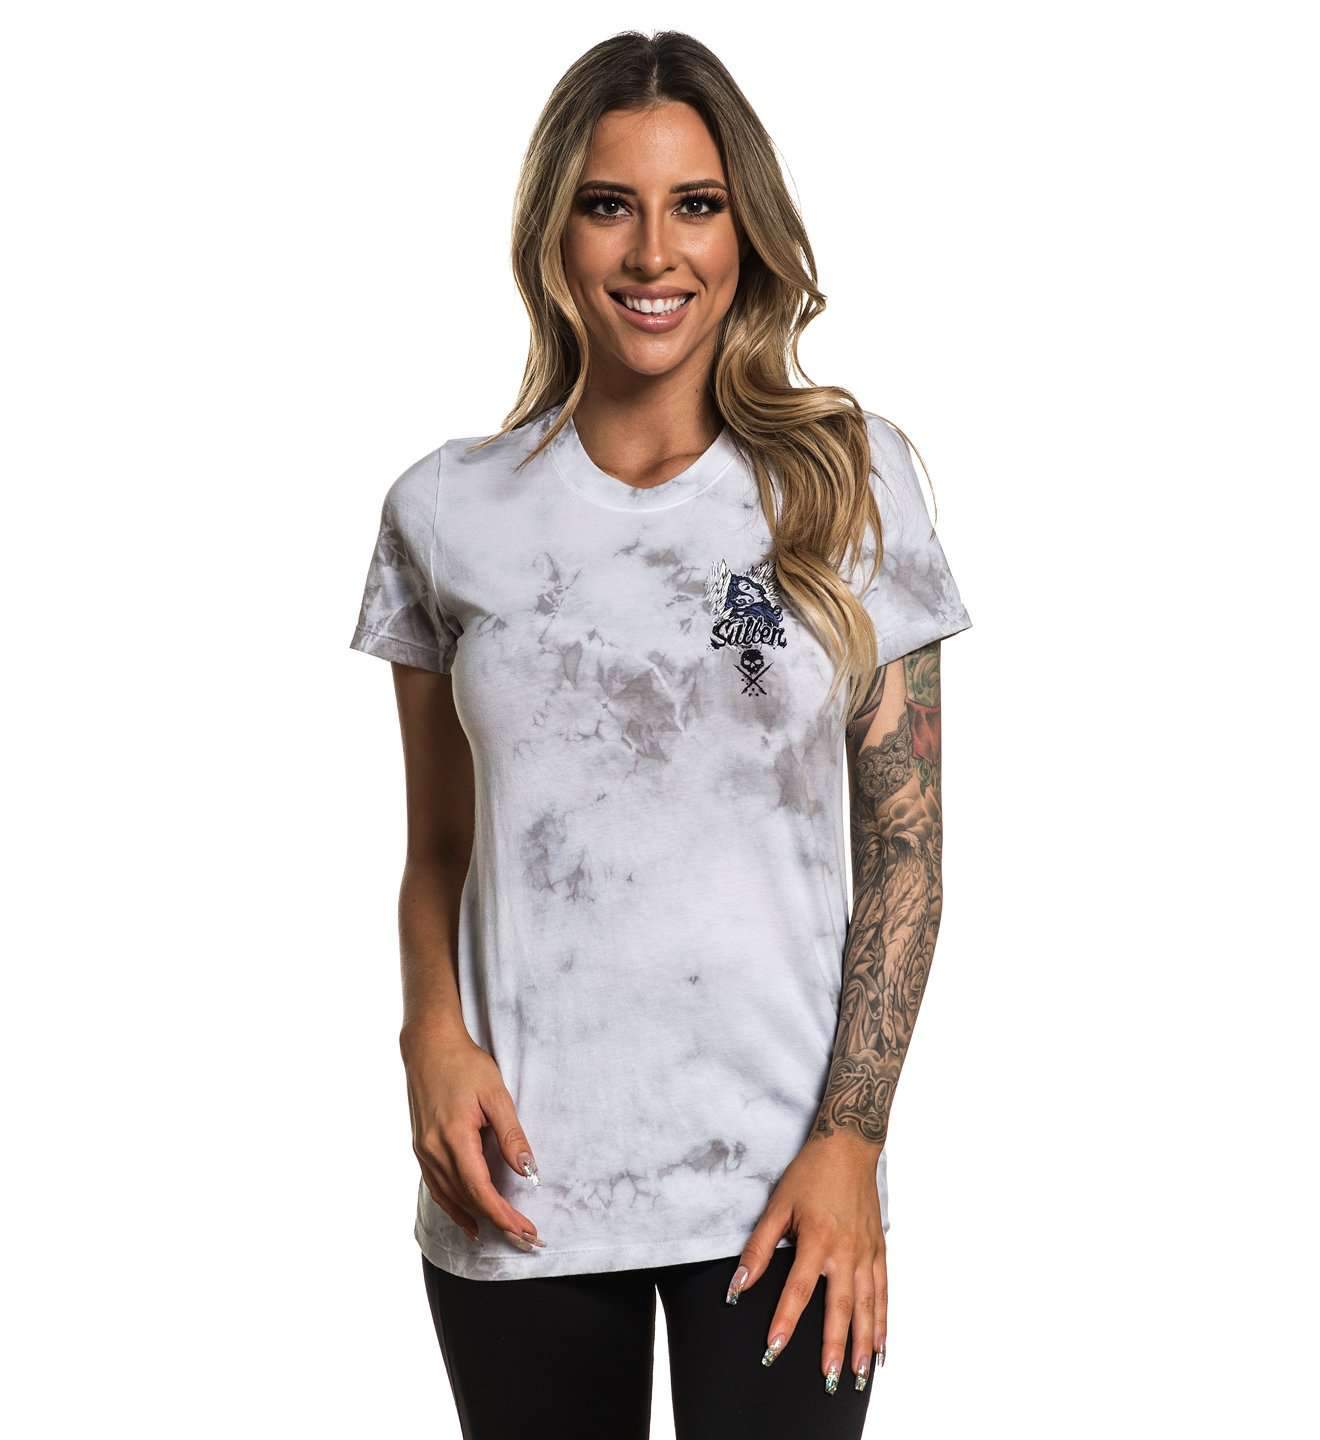 Angel Ink T-shirt by Sullen